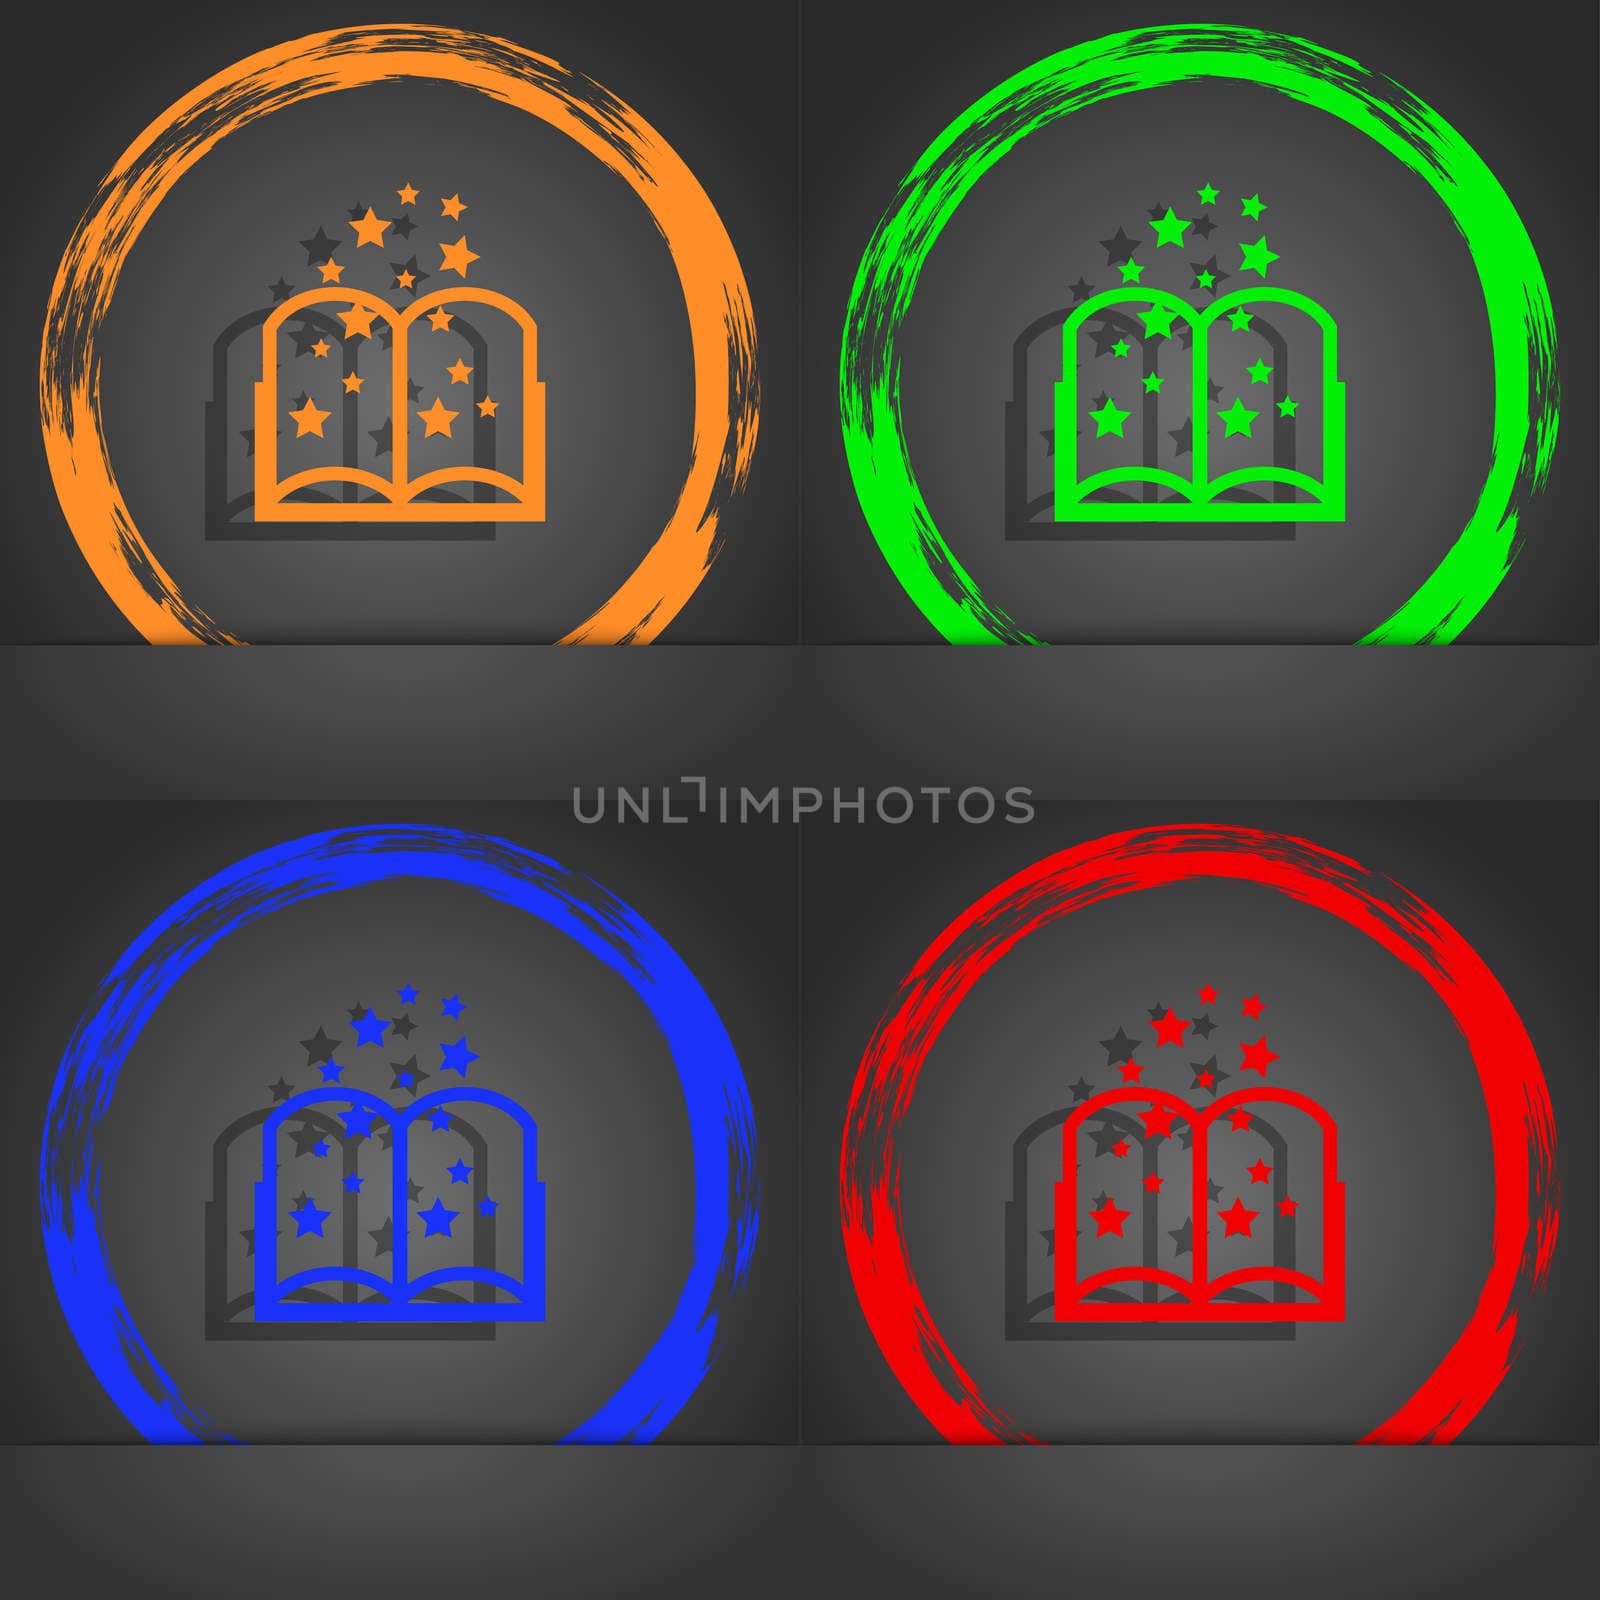 Magic Book sign icon. Open book symbol. Fashionable modern style. In the orange, green, blue, red design. illustration